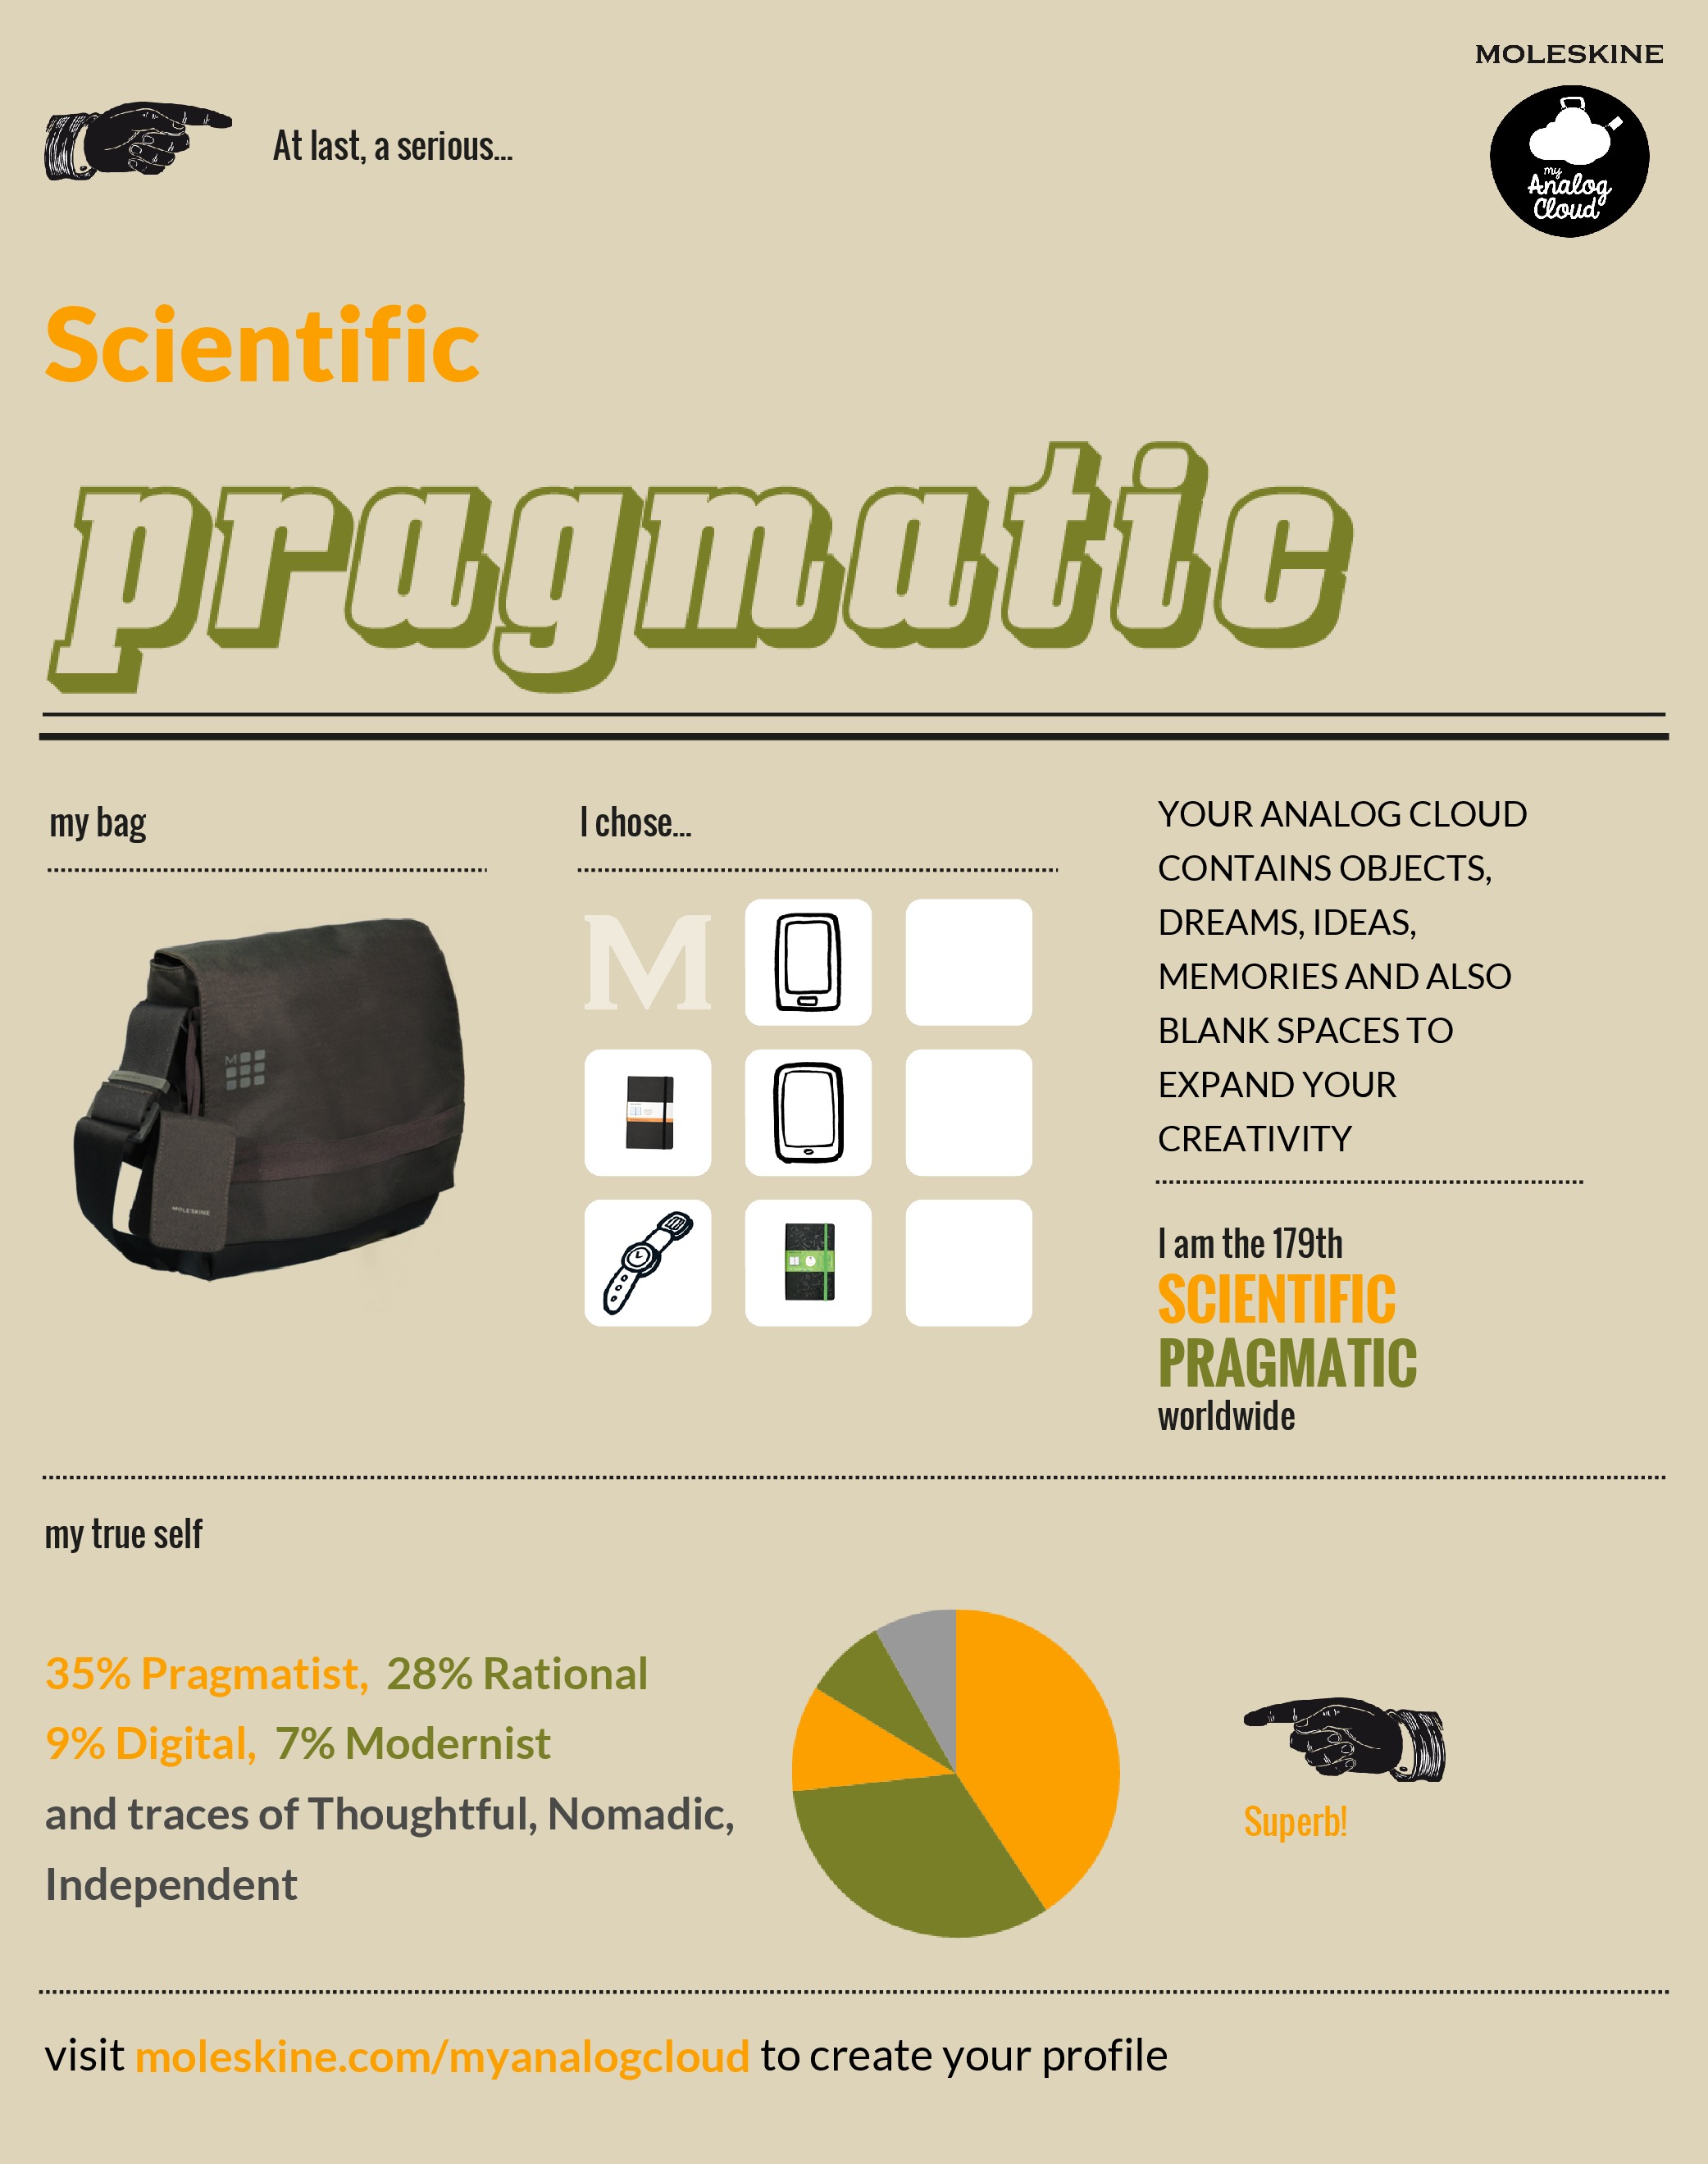 As expected…I am a Scientific Pragmatic :)